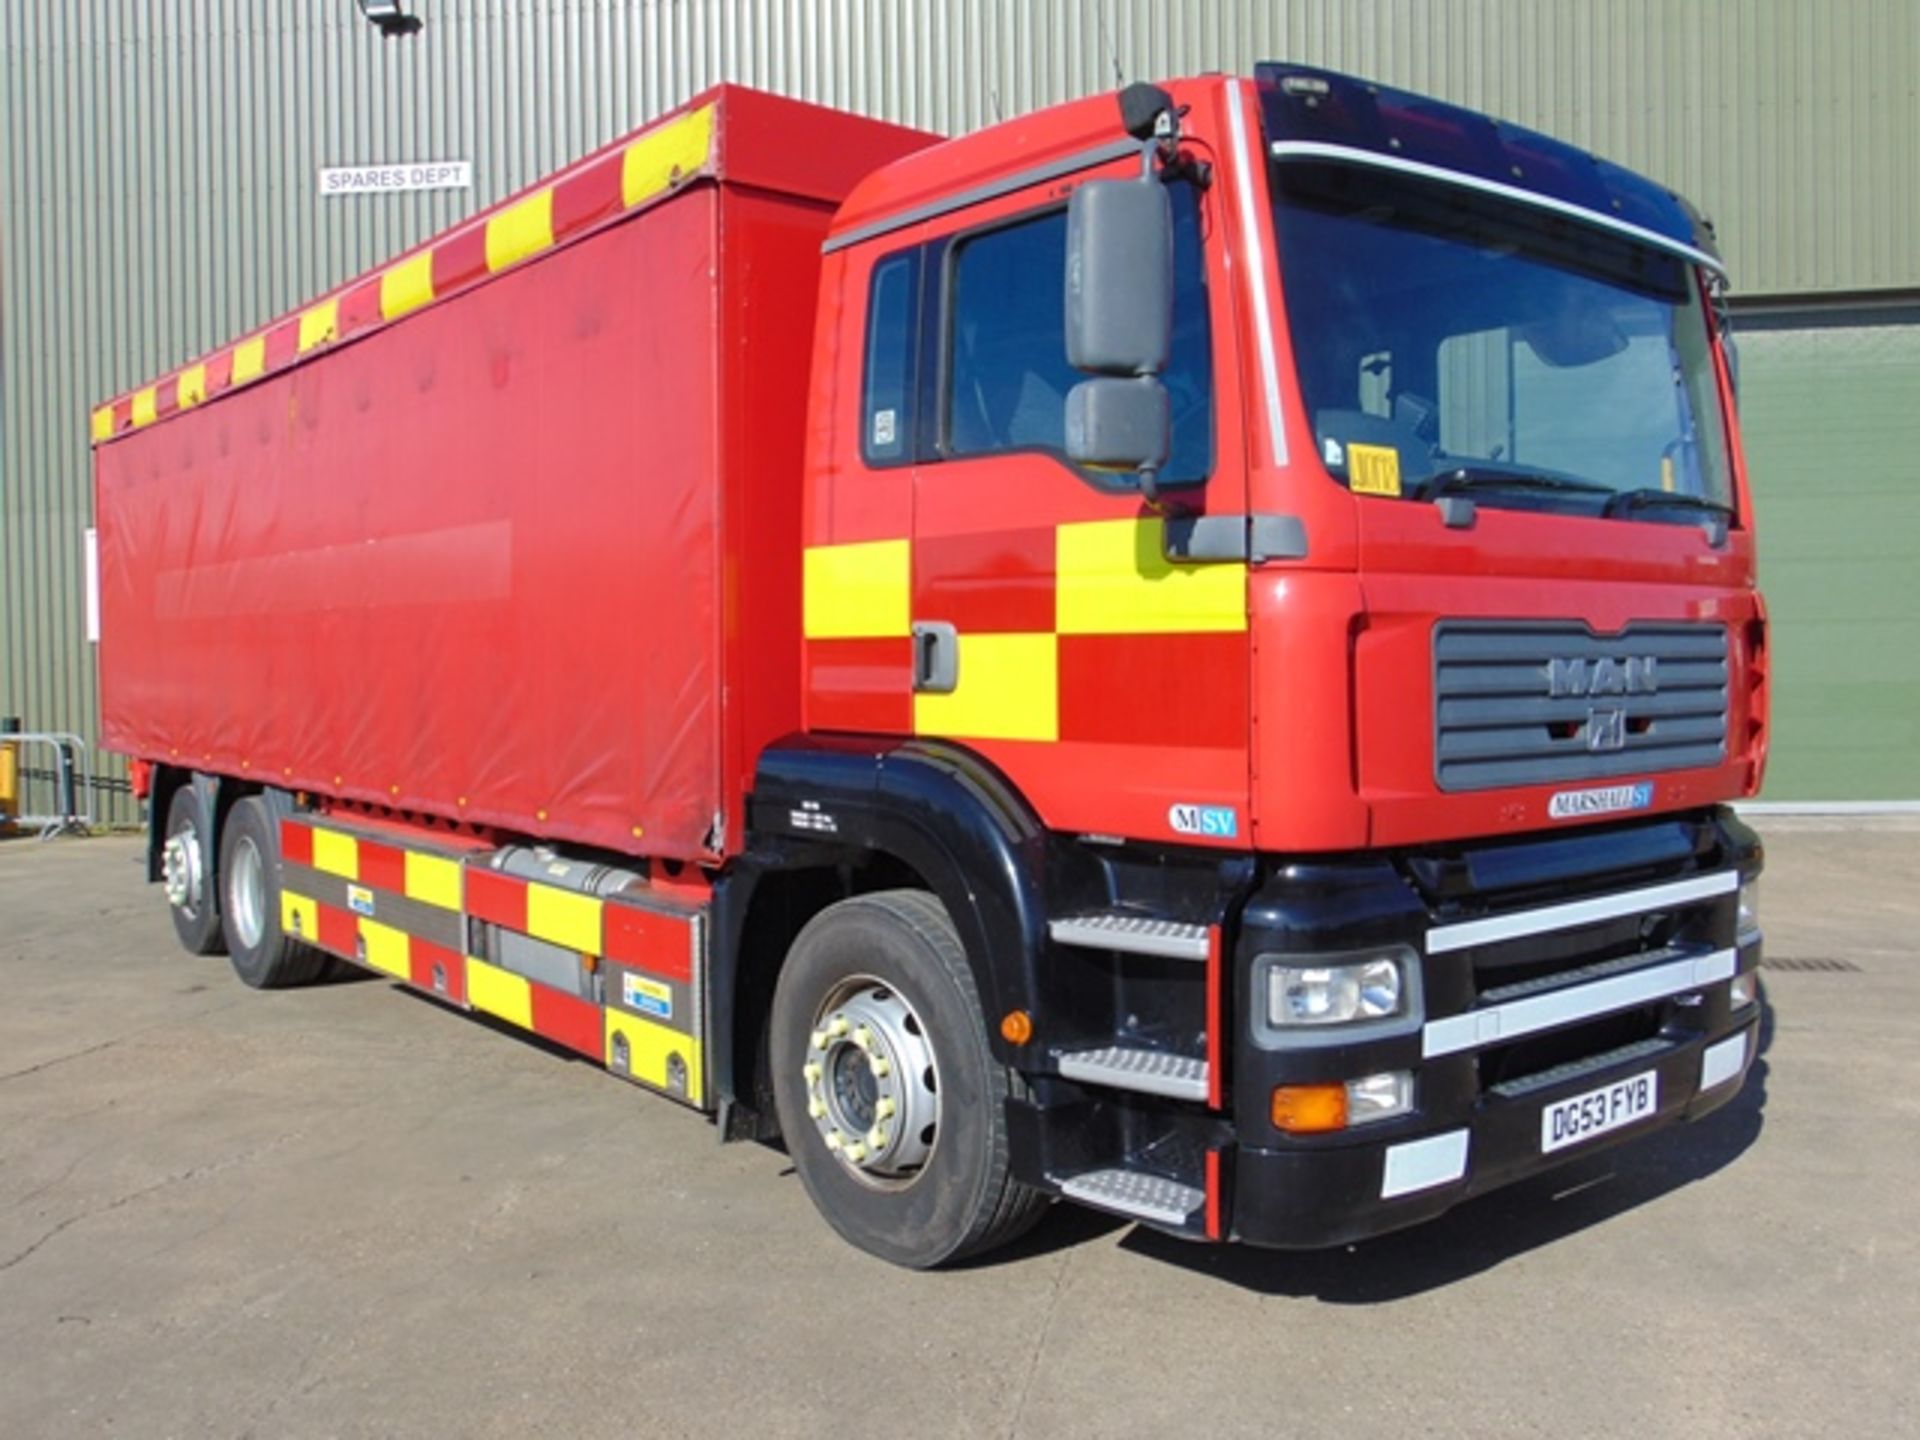 2003 MAN TG-A 6x2 Rear Steer Incident Support Unit - Image 2 of 27